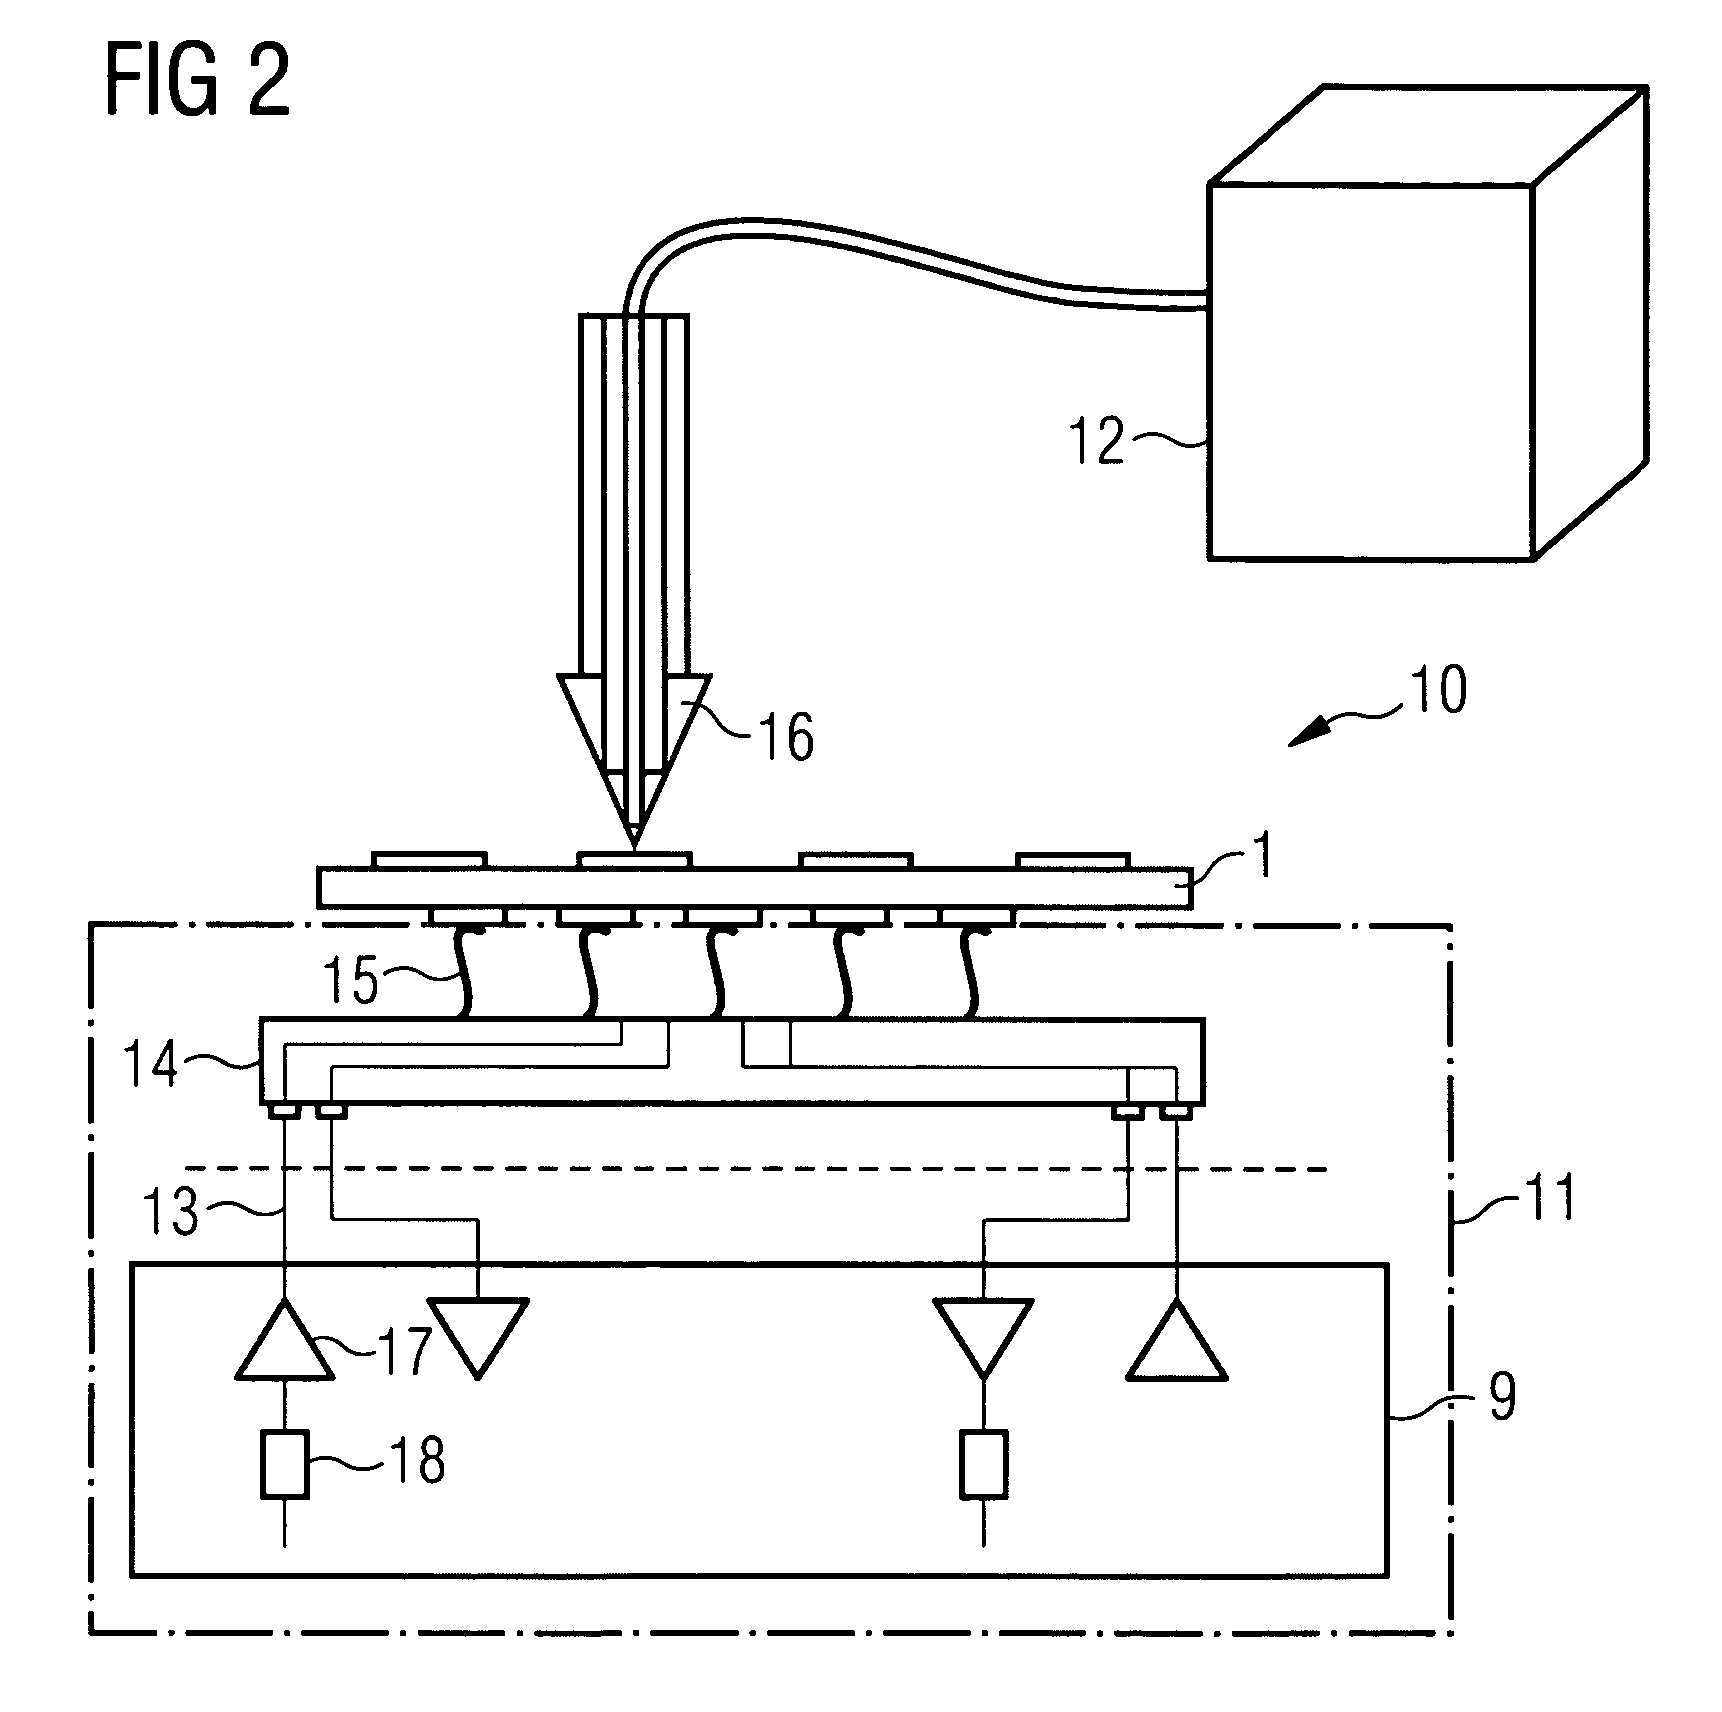 Contact plate for use in standardizing tester channels of a tester system and a standardization system having such a contact plate